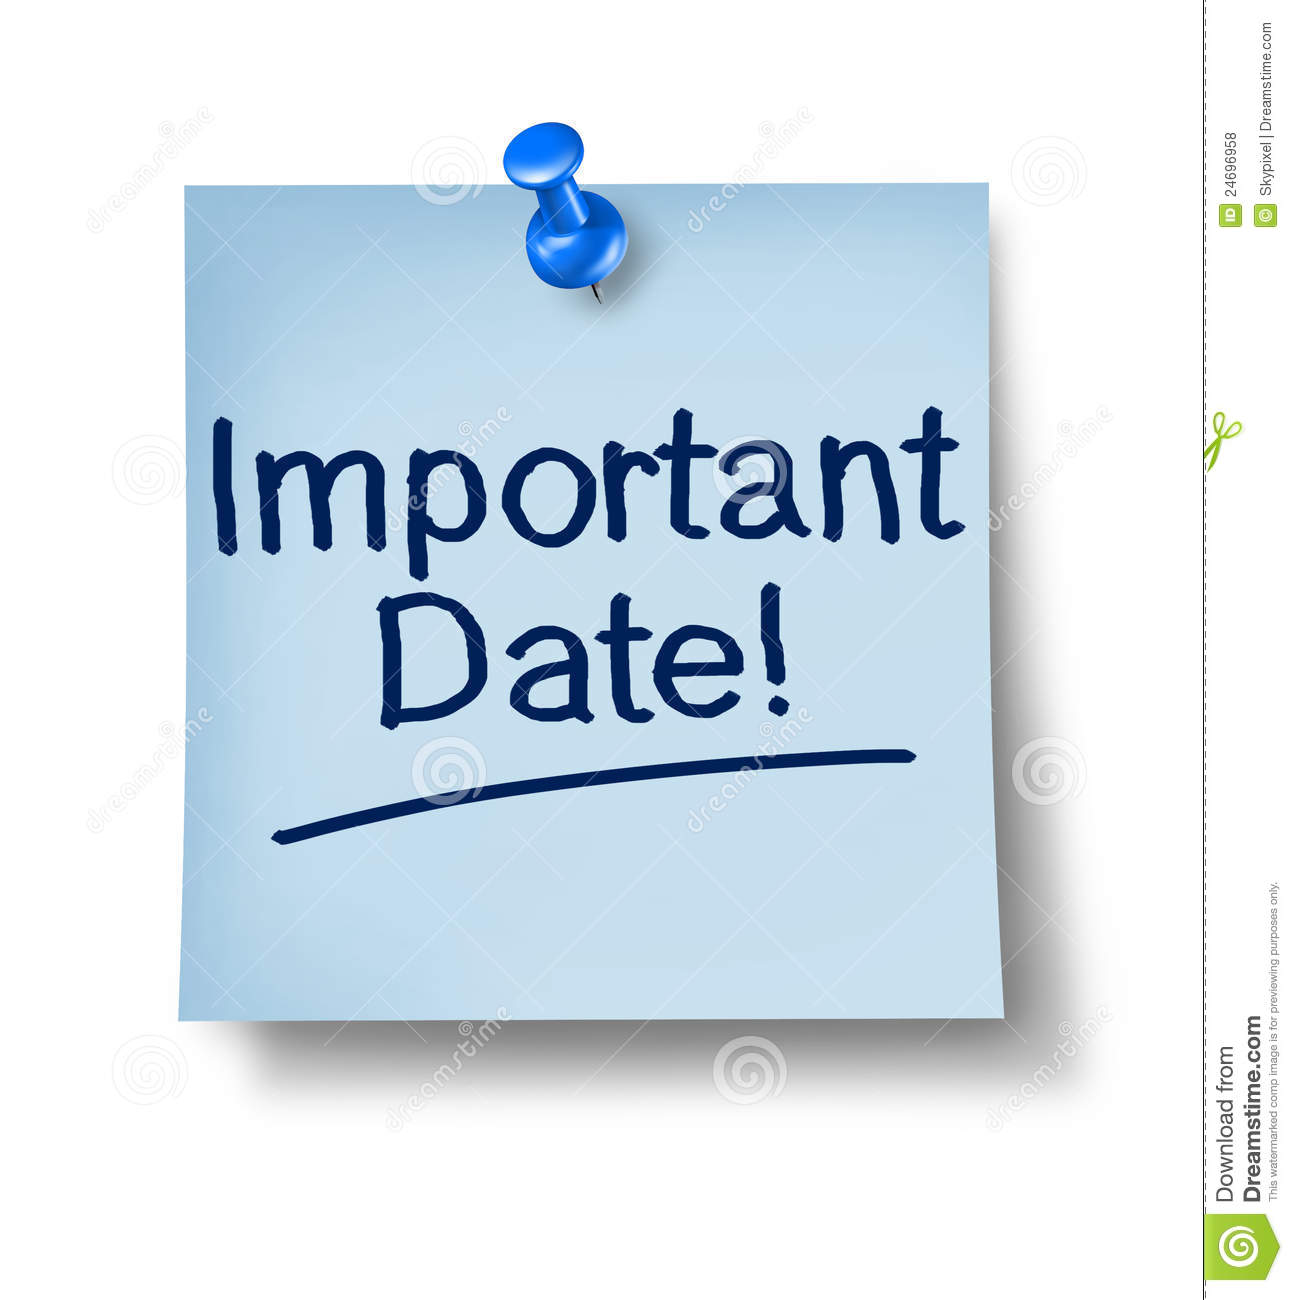 Important Date Office Note Royalty Free Stock Photos   Image  24696958